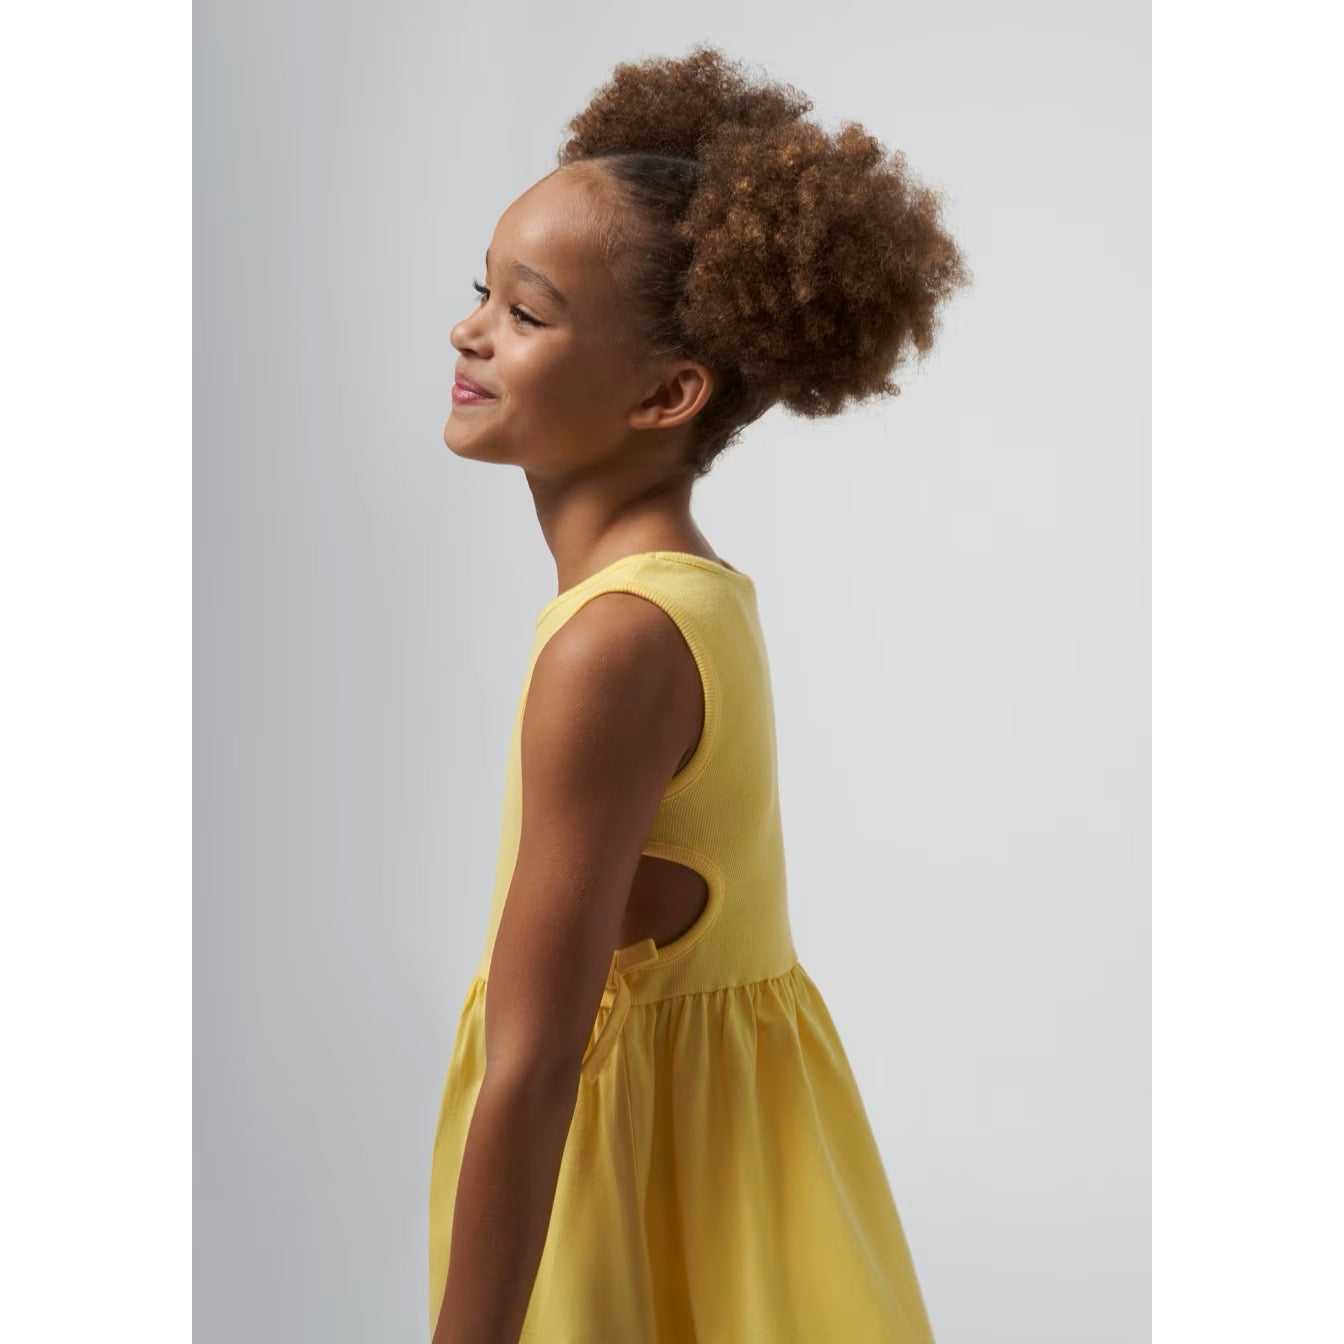 Mayoral Older Girls Cut Out Dress 6965 Yellow Clothing 10YRS / Yellow,12YRS / Yellow,14YRS / Yellow